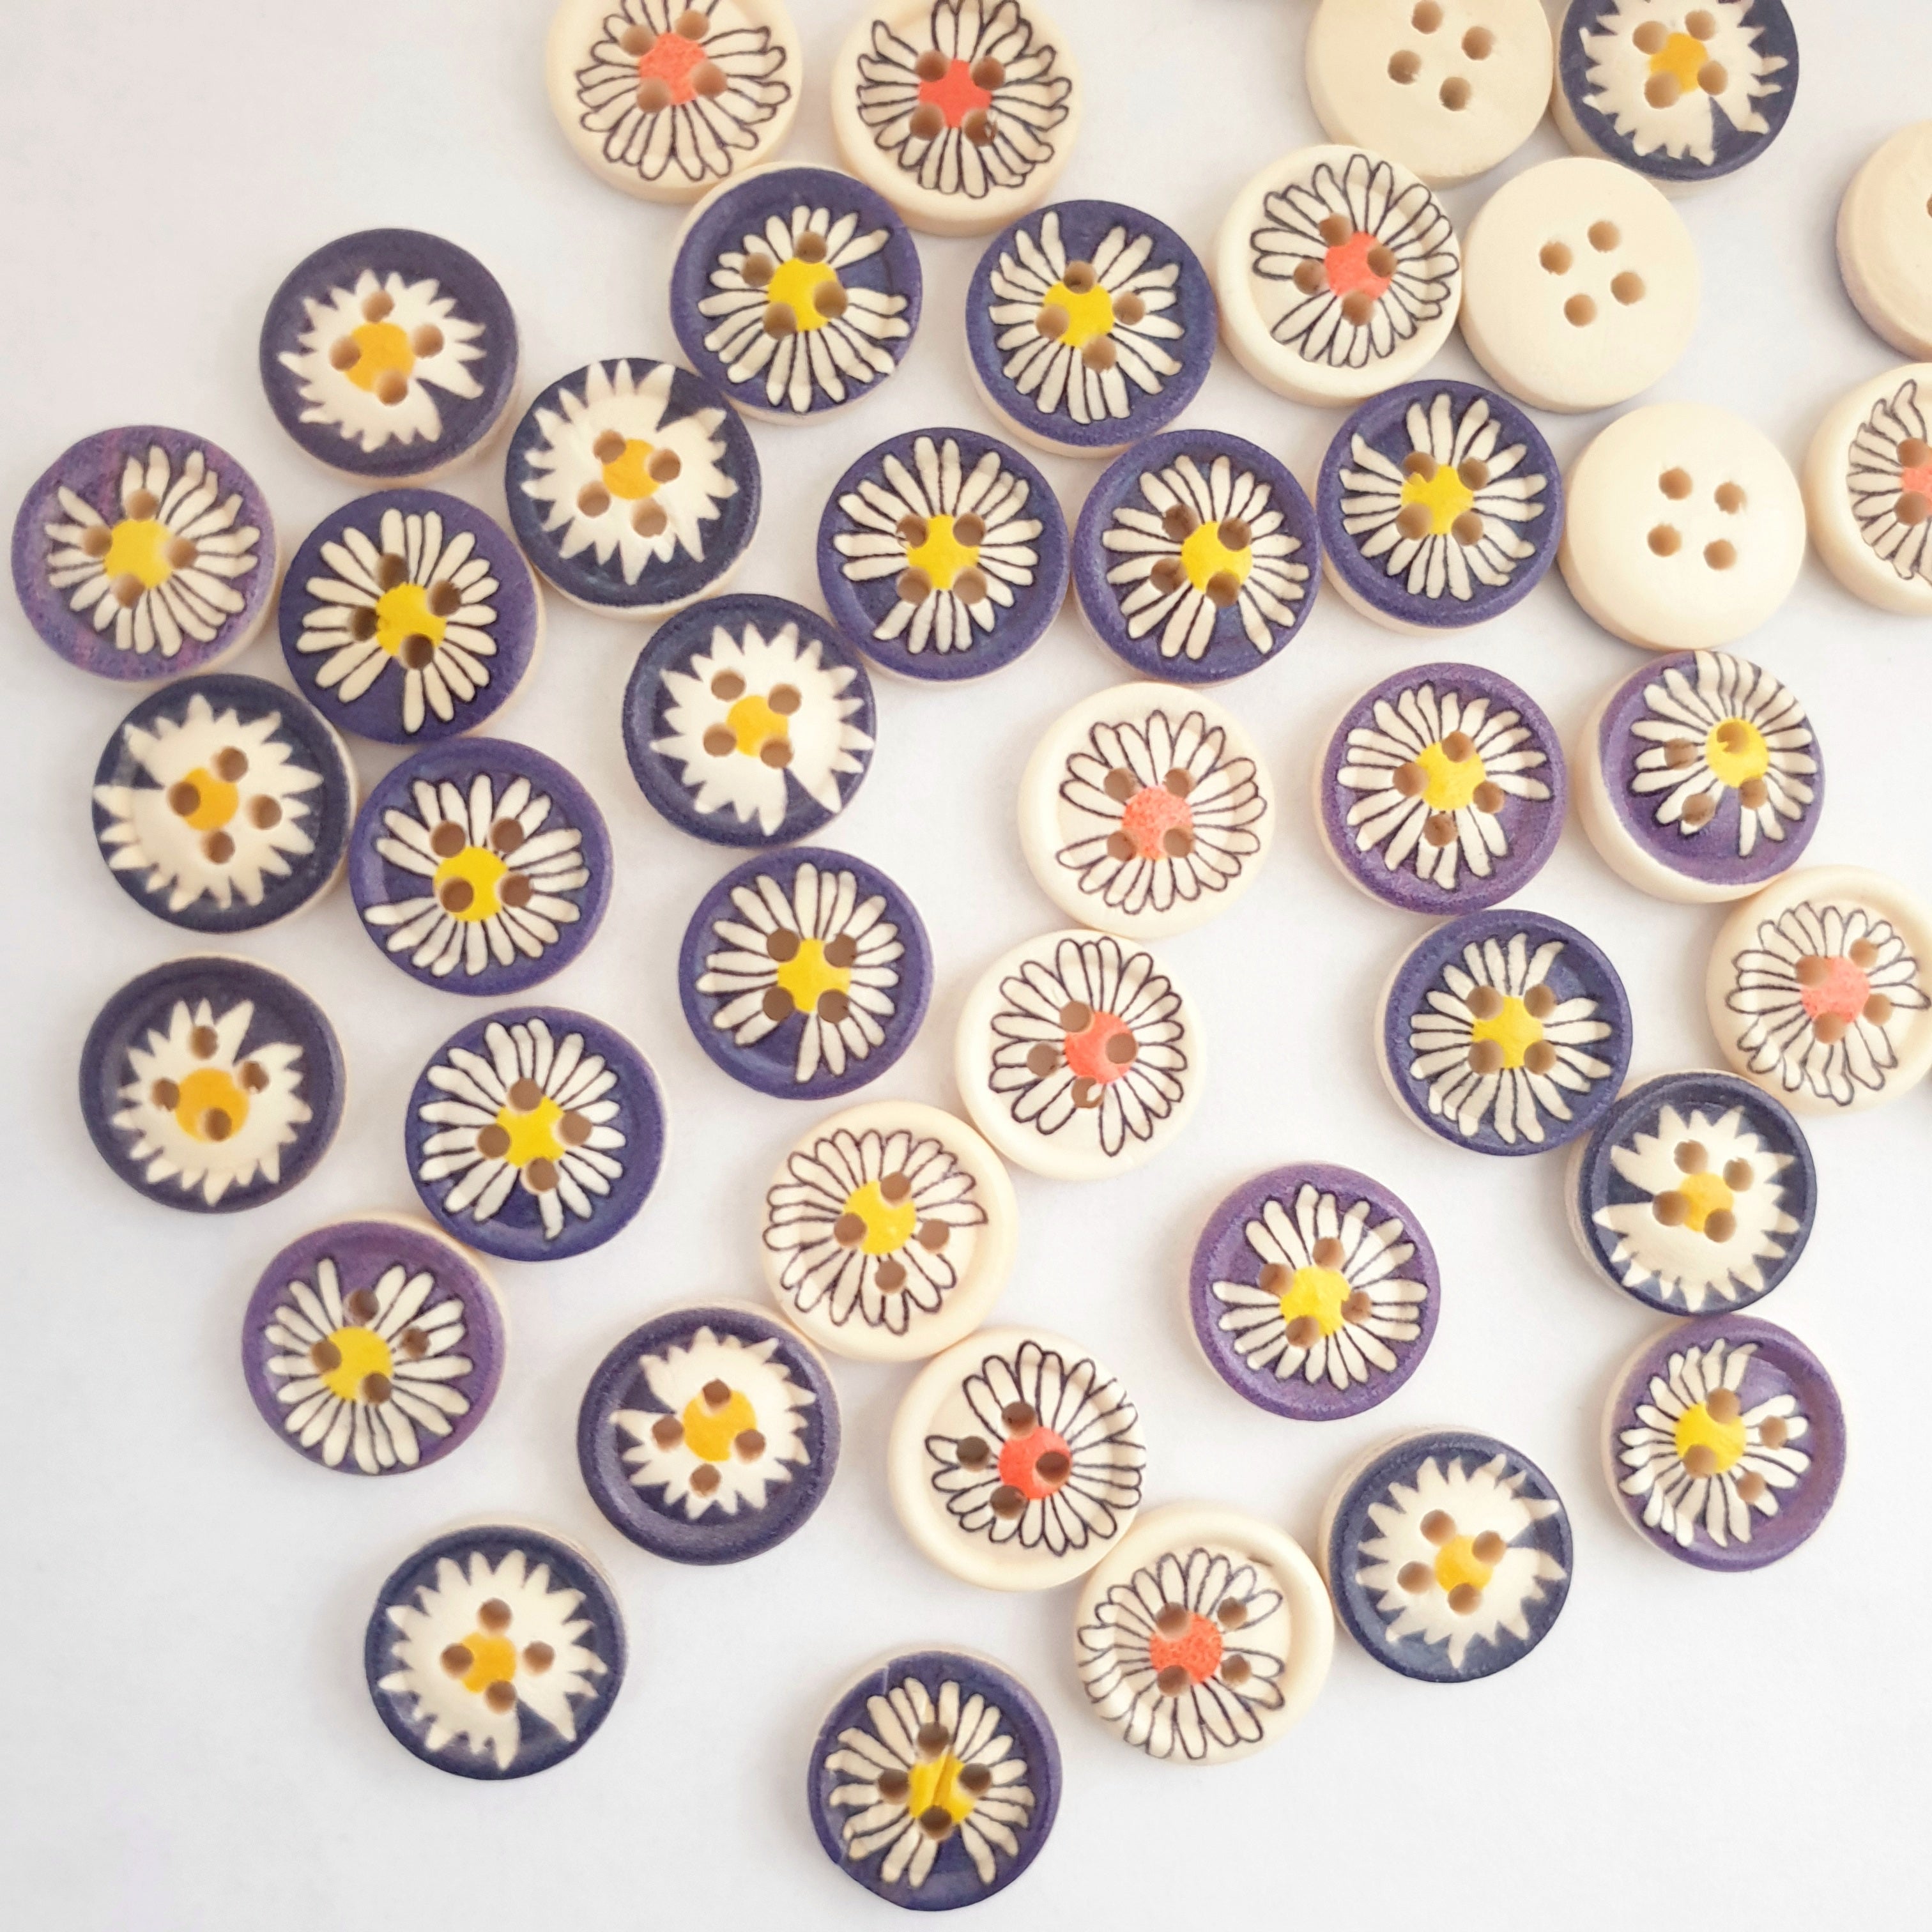 MajorCrafts 44pcs 13mm Mixed Colours Daisy Flower Pattern Round 4 Holes Wooden Sewing Buttons